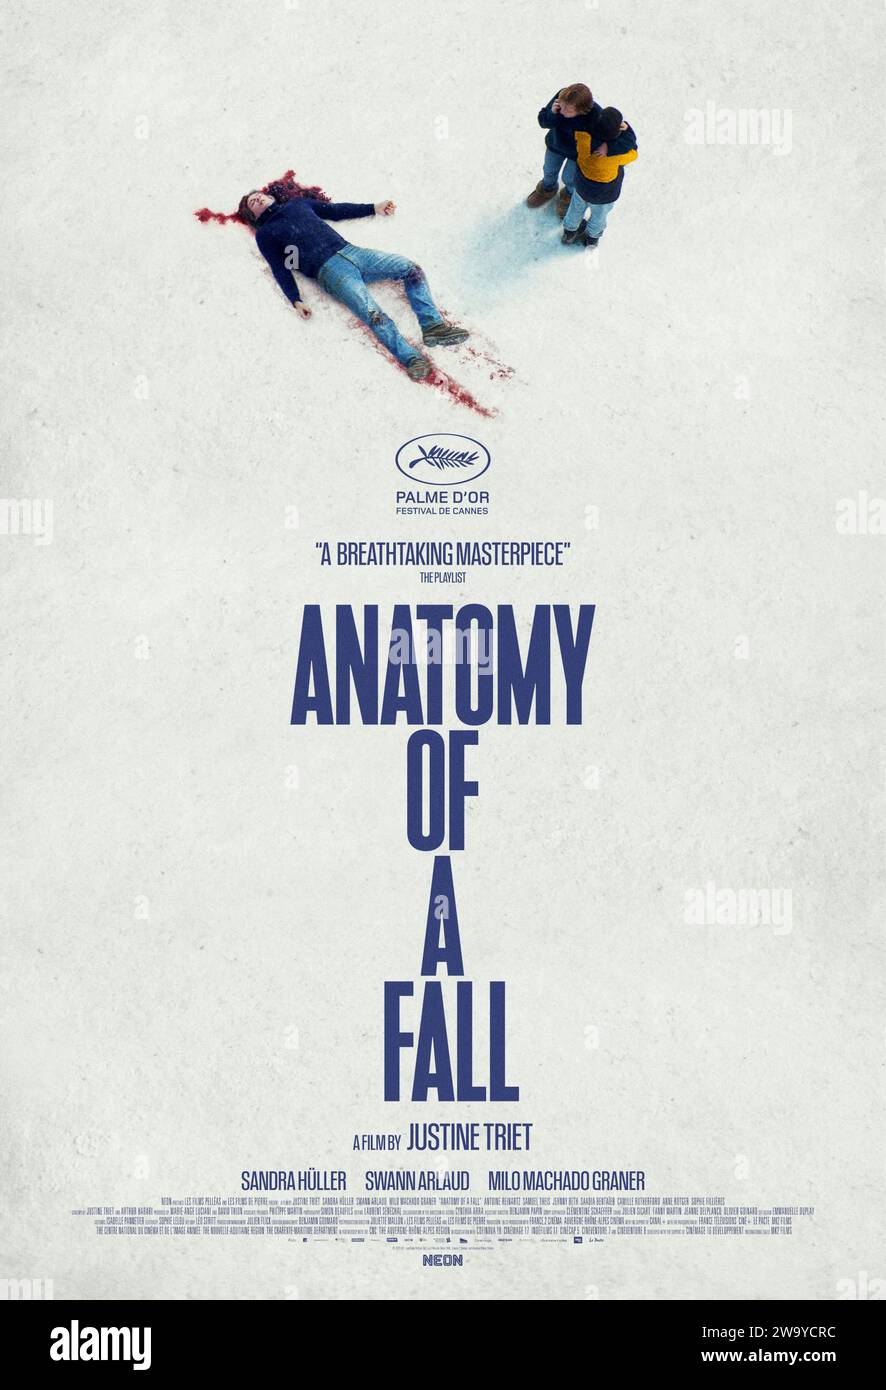 Anatomy of a Fall (2023) directed by Justine Triet and starring Sandra Hüller, Swann Arlaud and Milo Machado Graner. A woman is suspected of her husband's murder, and their blind son faces a moral dilemma as the main witness. US one sheet poster ***EDITORIAL USE ONLY***. Credit: BFA / Neon Stock Photo